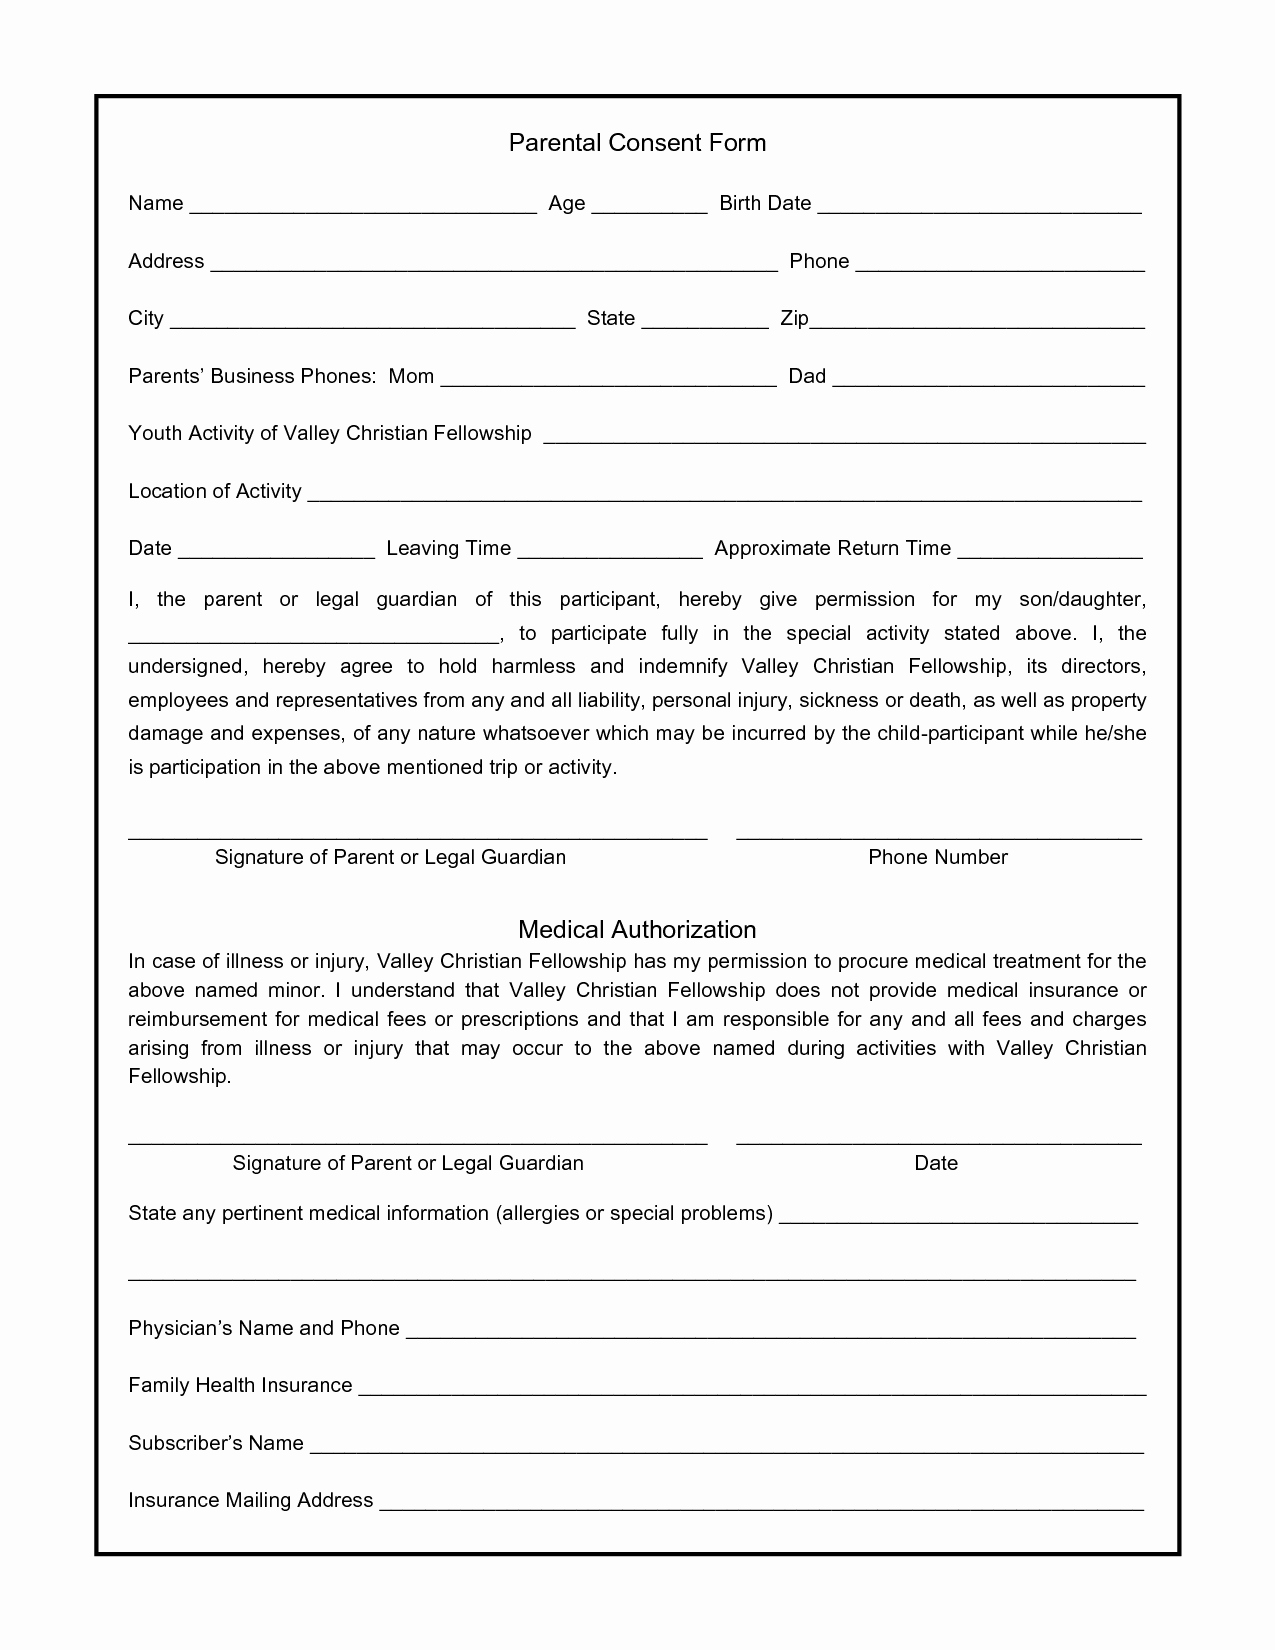 Medical Consent form Template Awesome Parental Consent form for S Swifter Parental